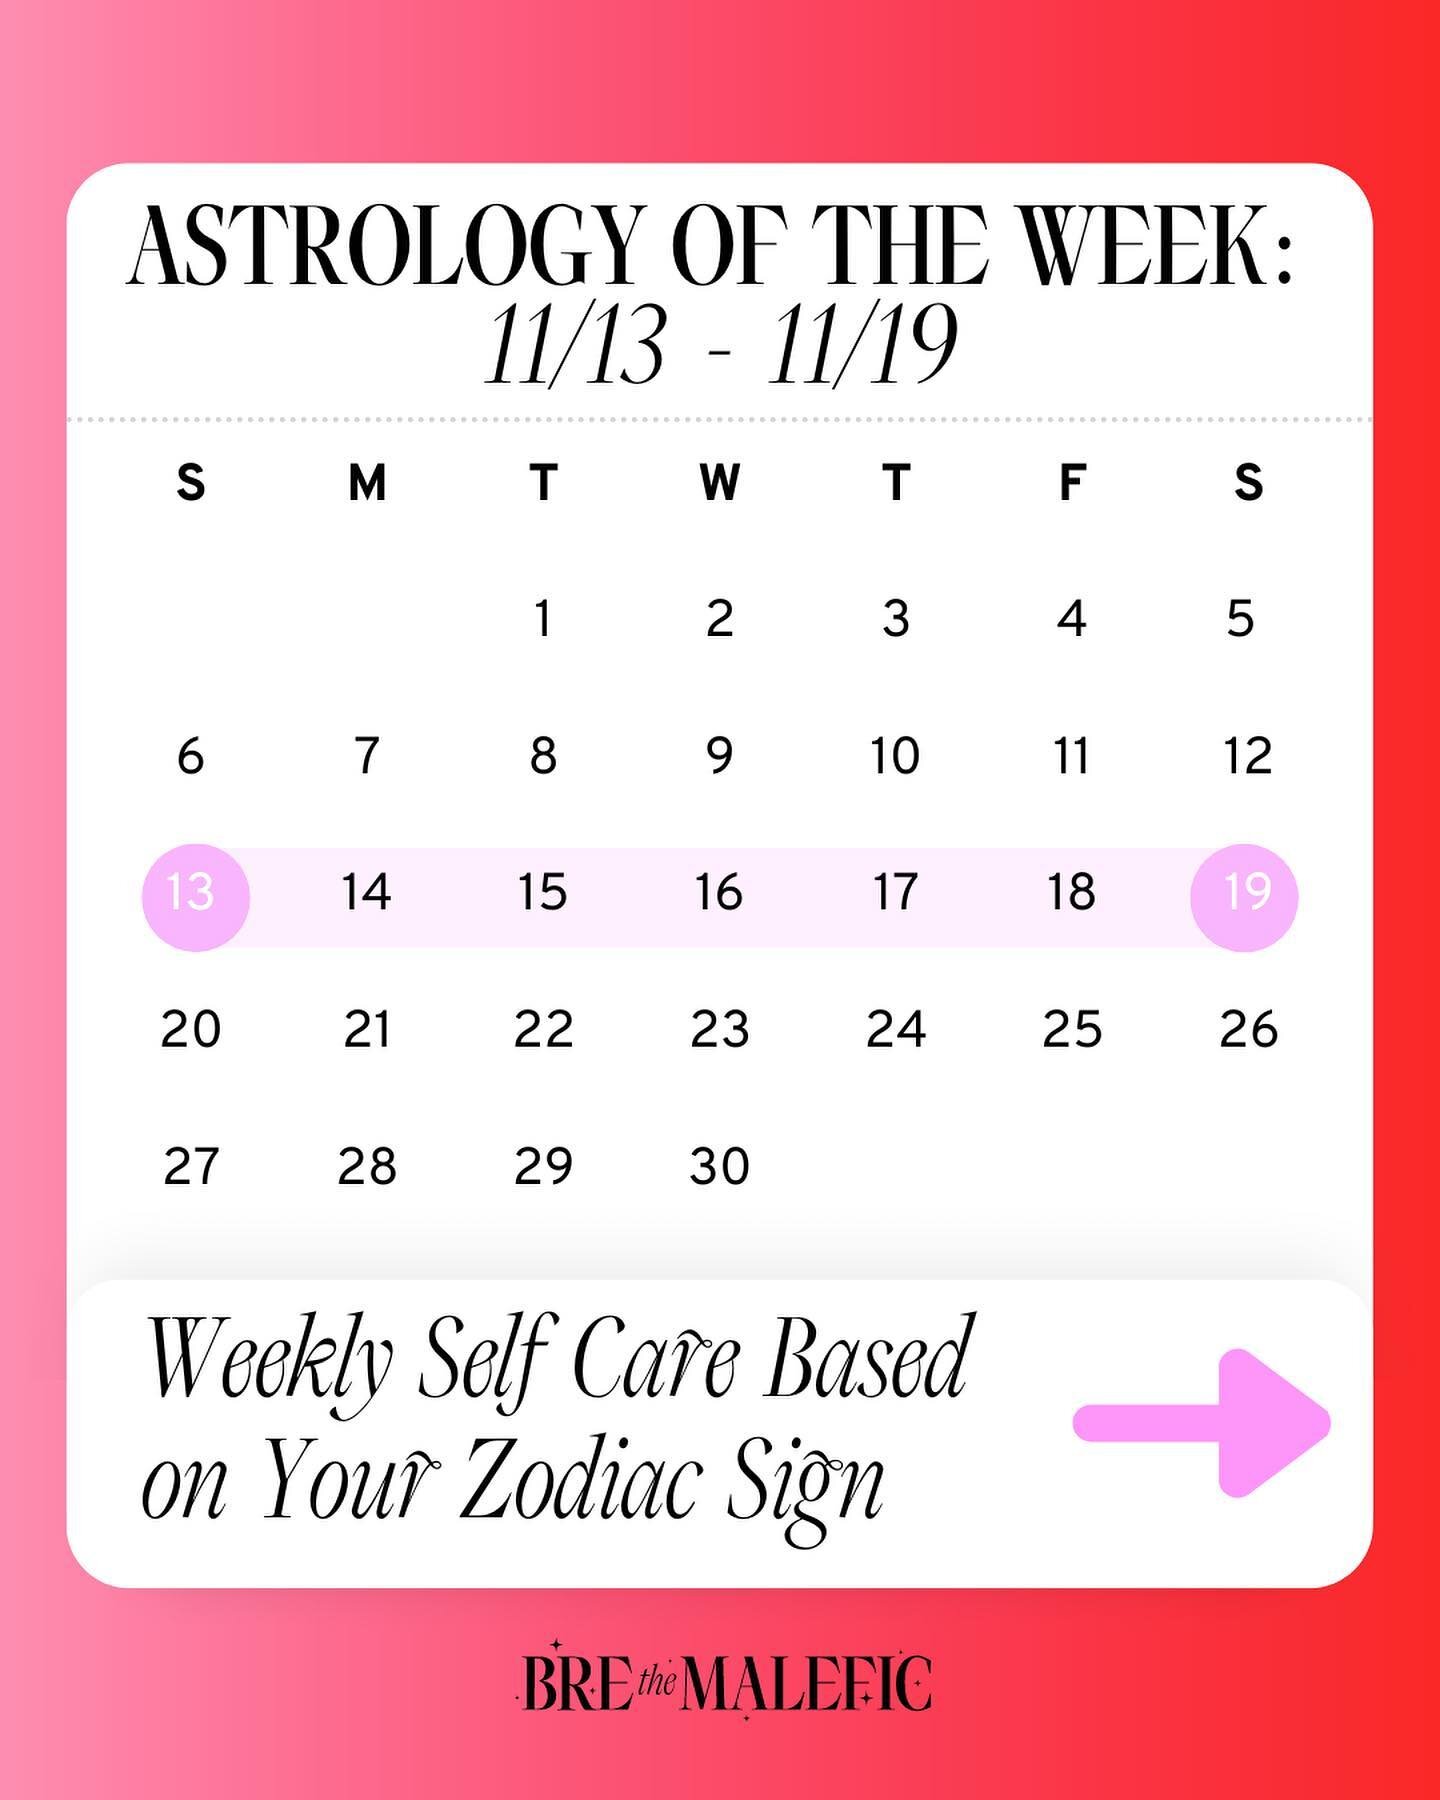 📍Astrology for the week ahead📍

🤙🏽We&rsquo;re finally leaving eclipse season and leaning into Sag energy
🧘🏻&zwj;♀️This is a PERFECT time to relax, kick back, and practice some major self care
💫Check all of your placements for the ultimate self